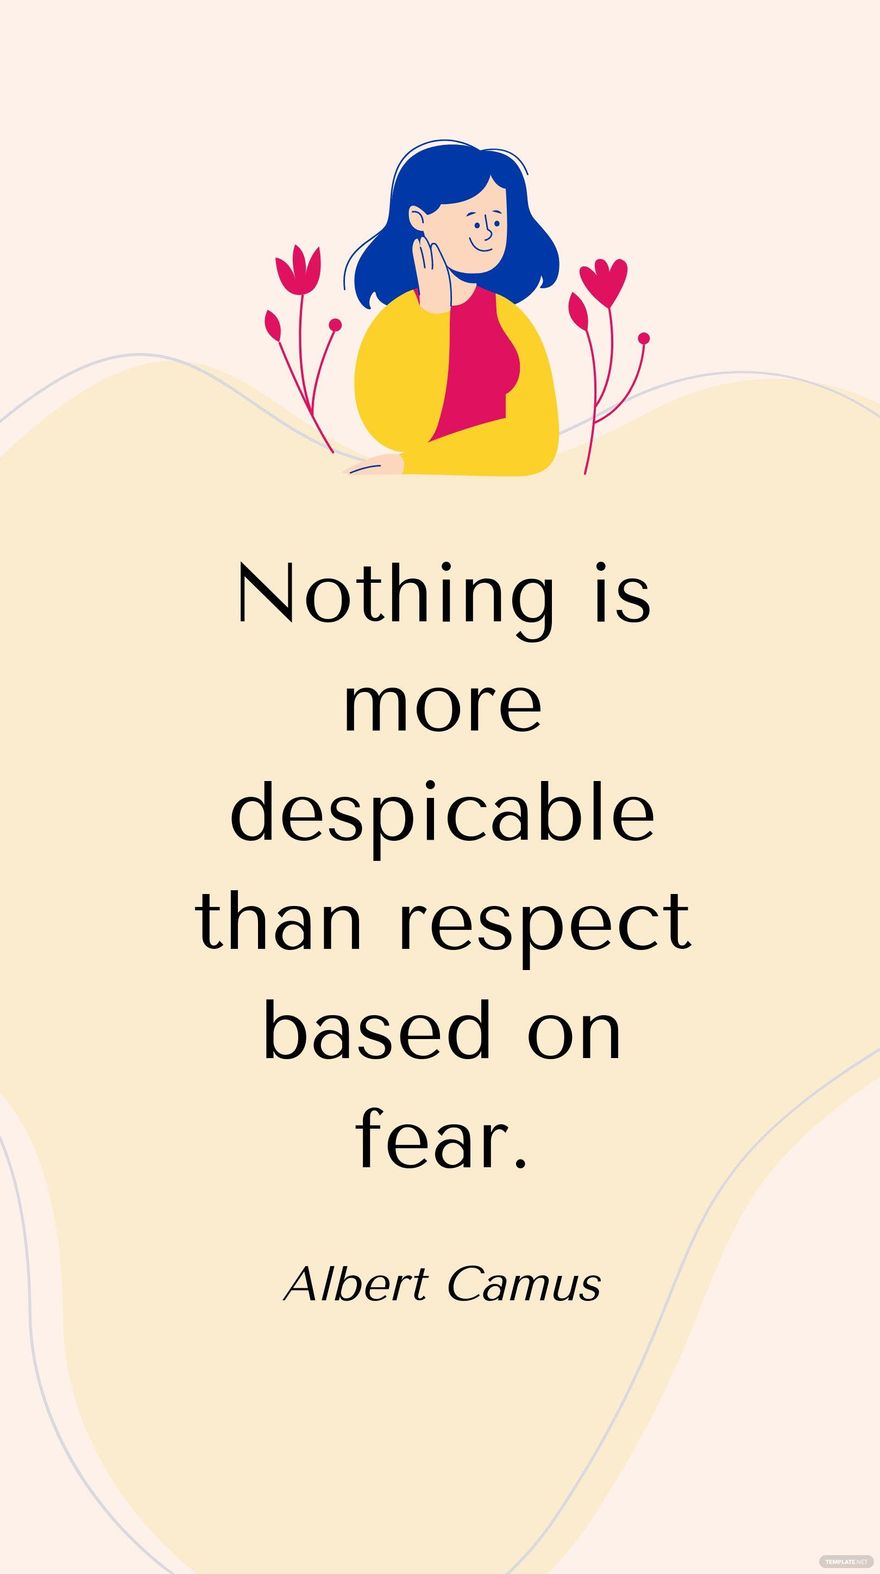 Free Albert Camus - Nothing is more despicable than respect based on fear. in JPG